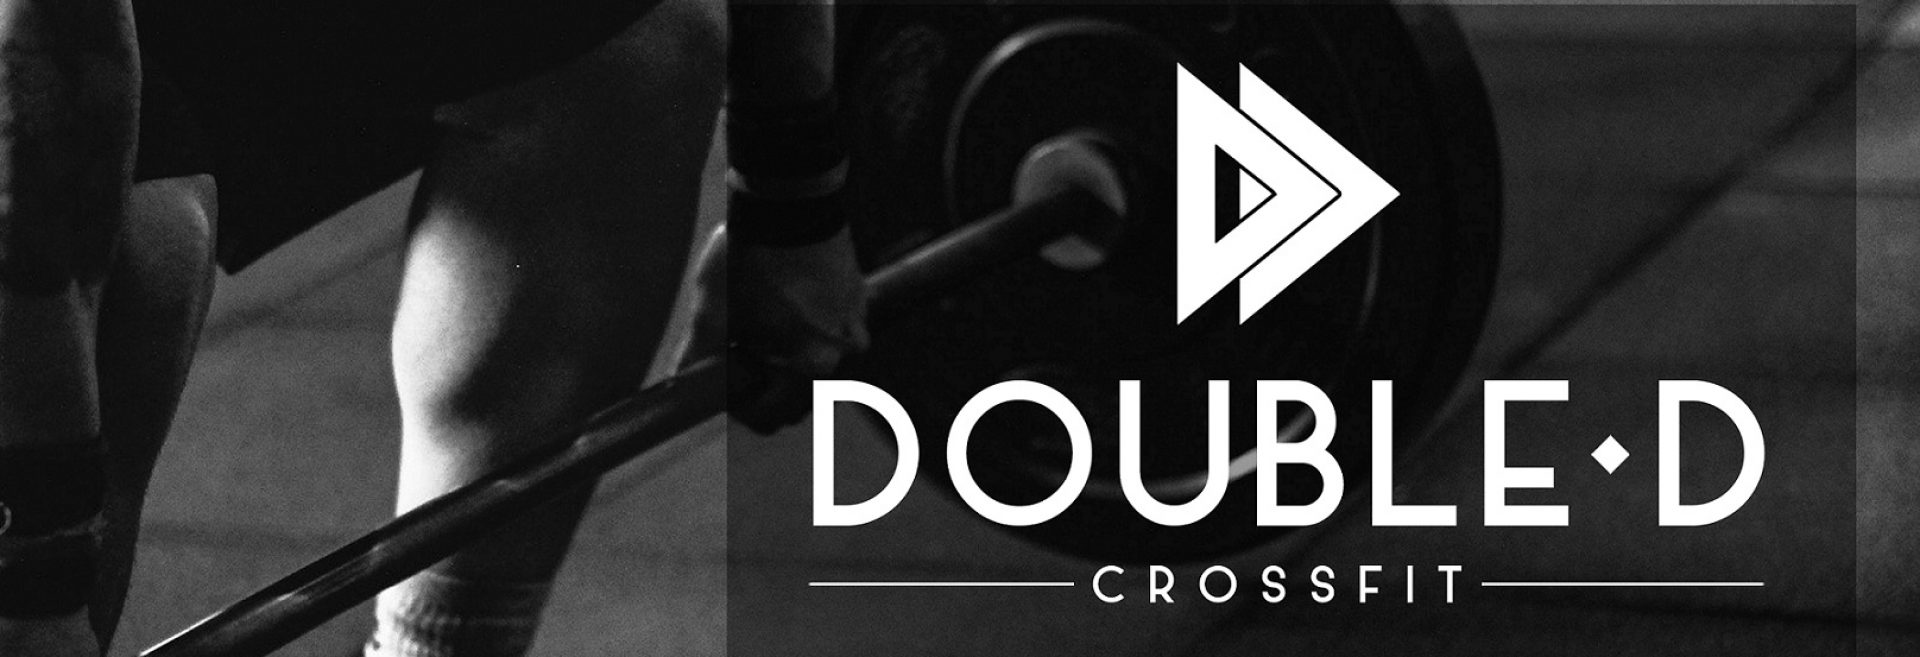 DoubleD CrossFit